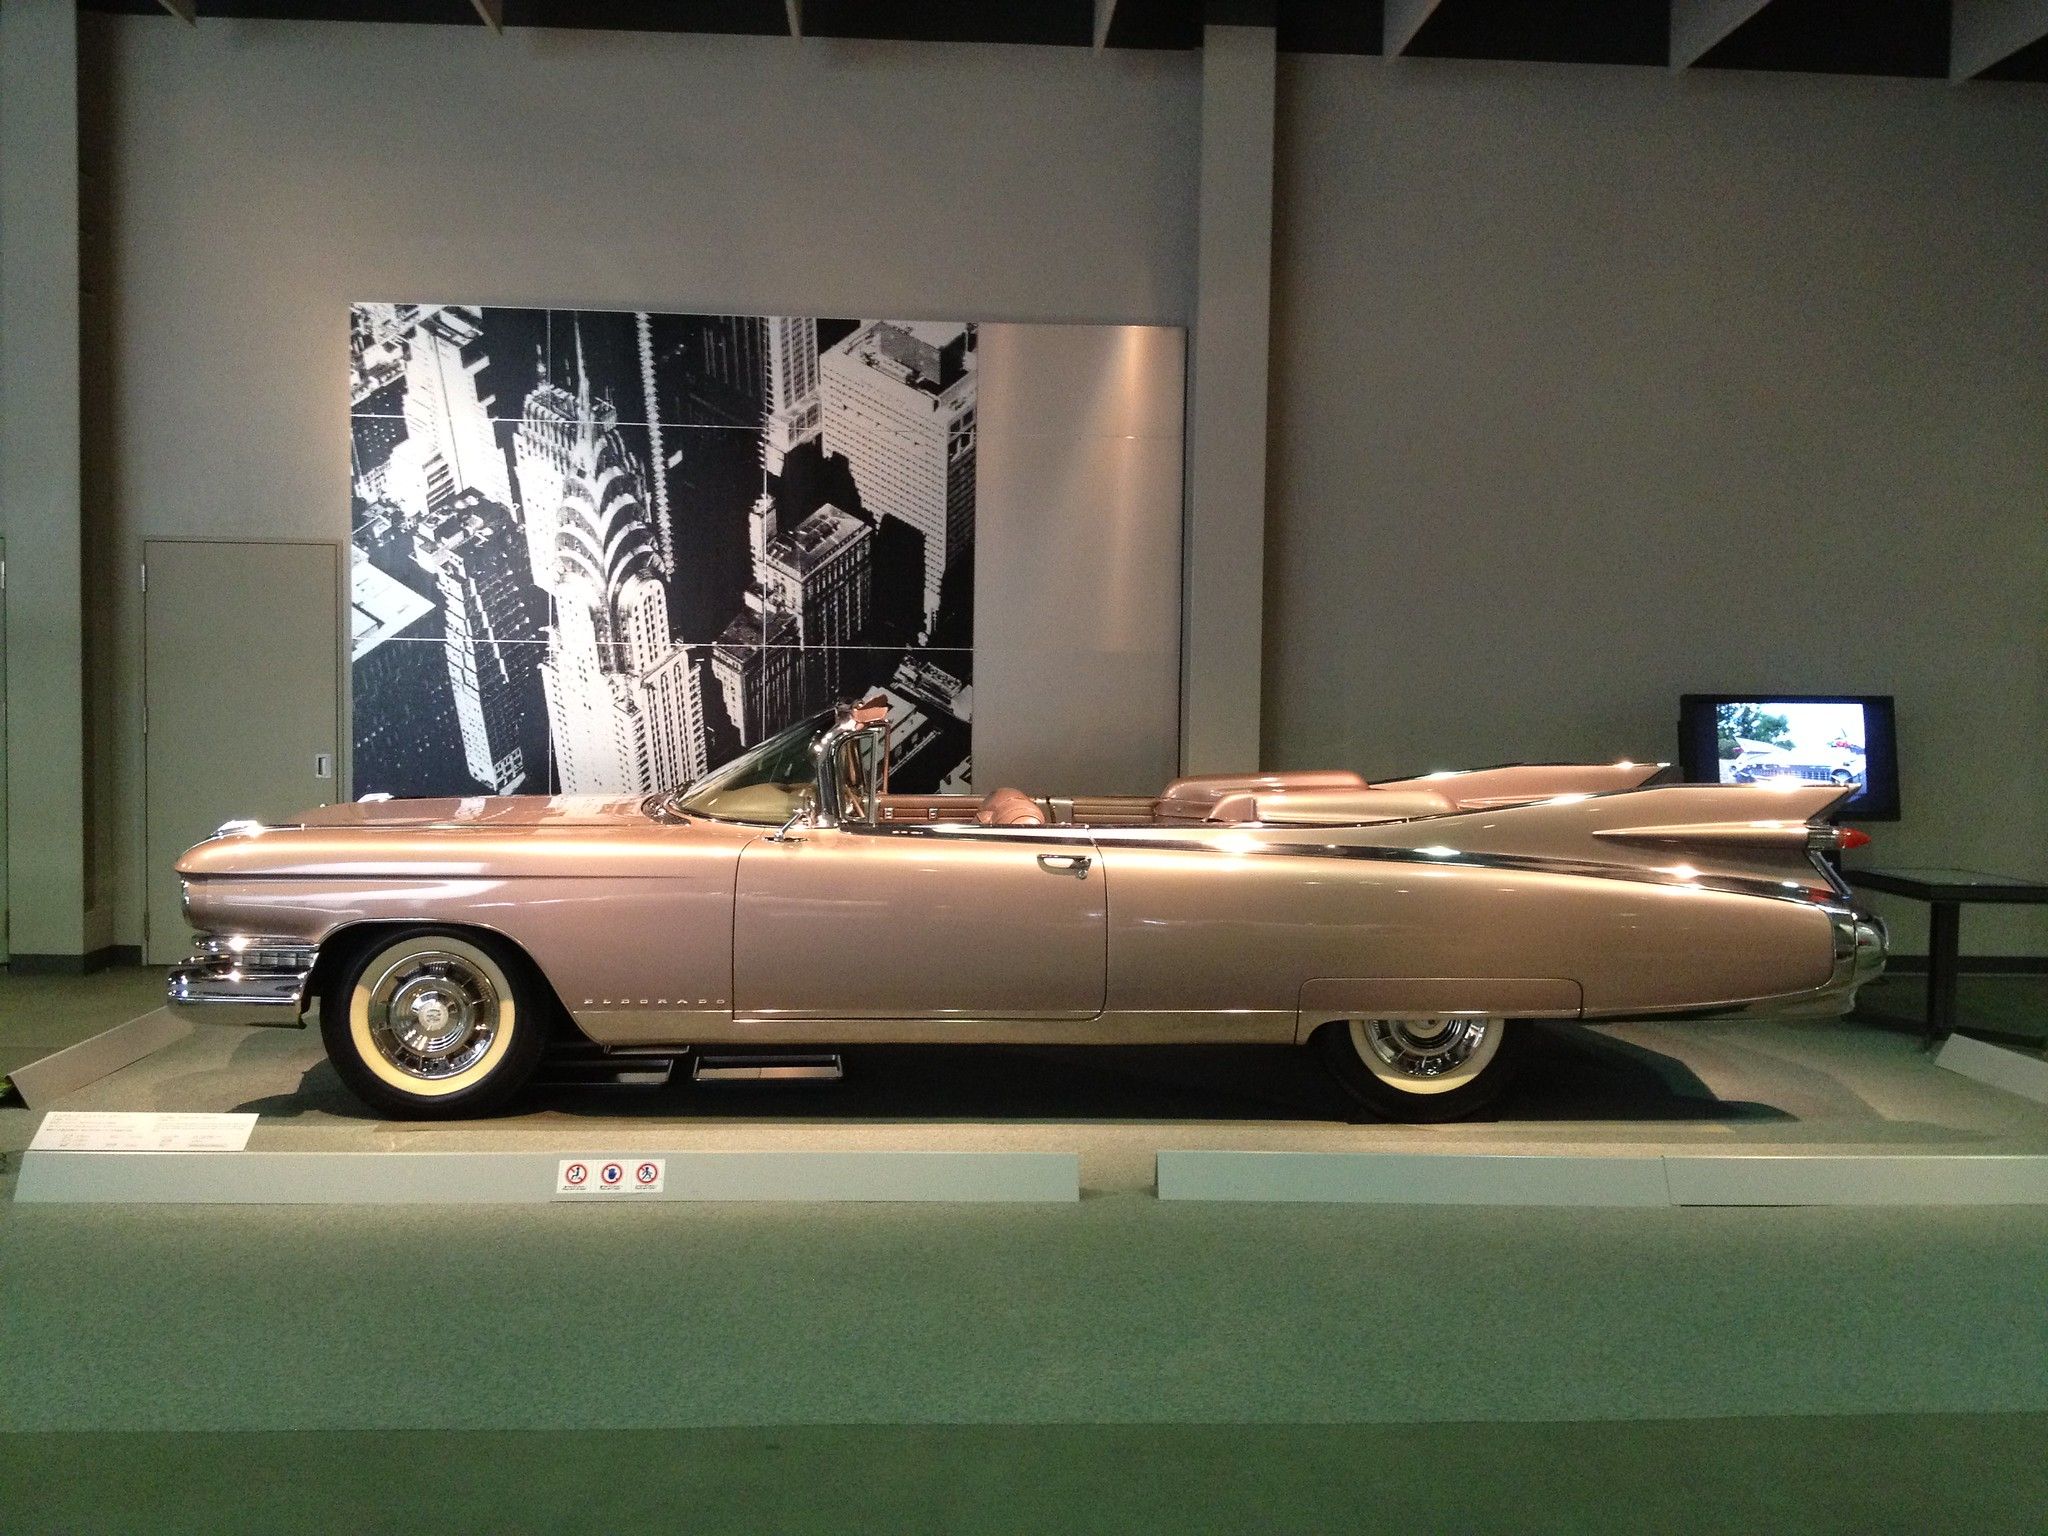 A side view on the 1959 Eldorado Biarritz from the exhibition.